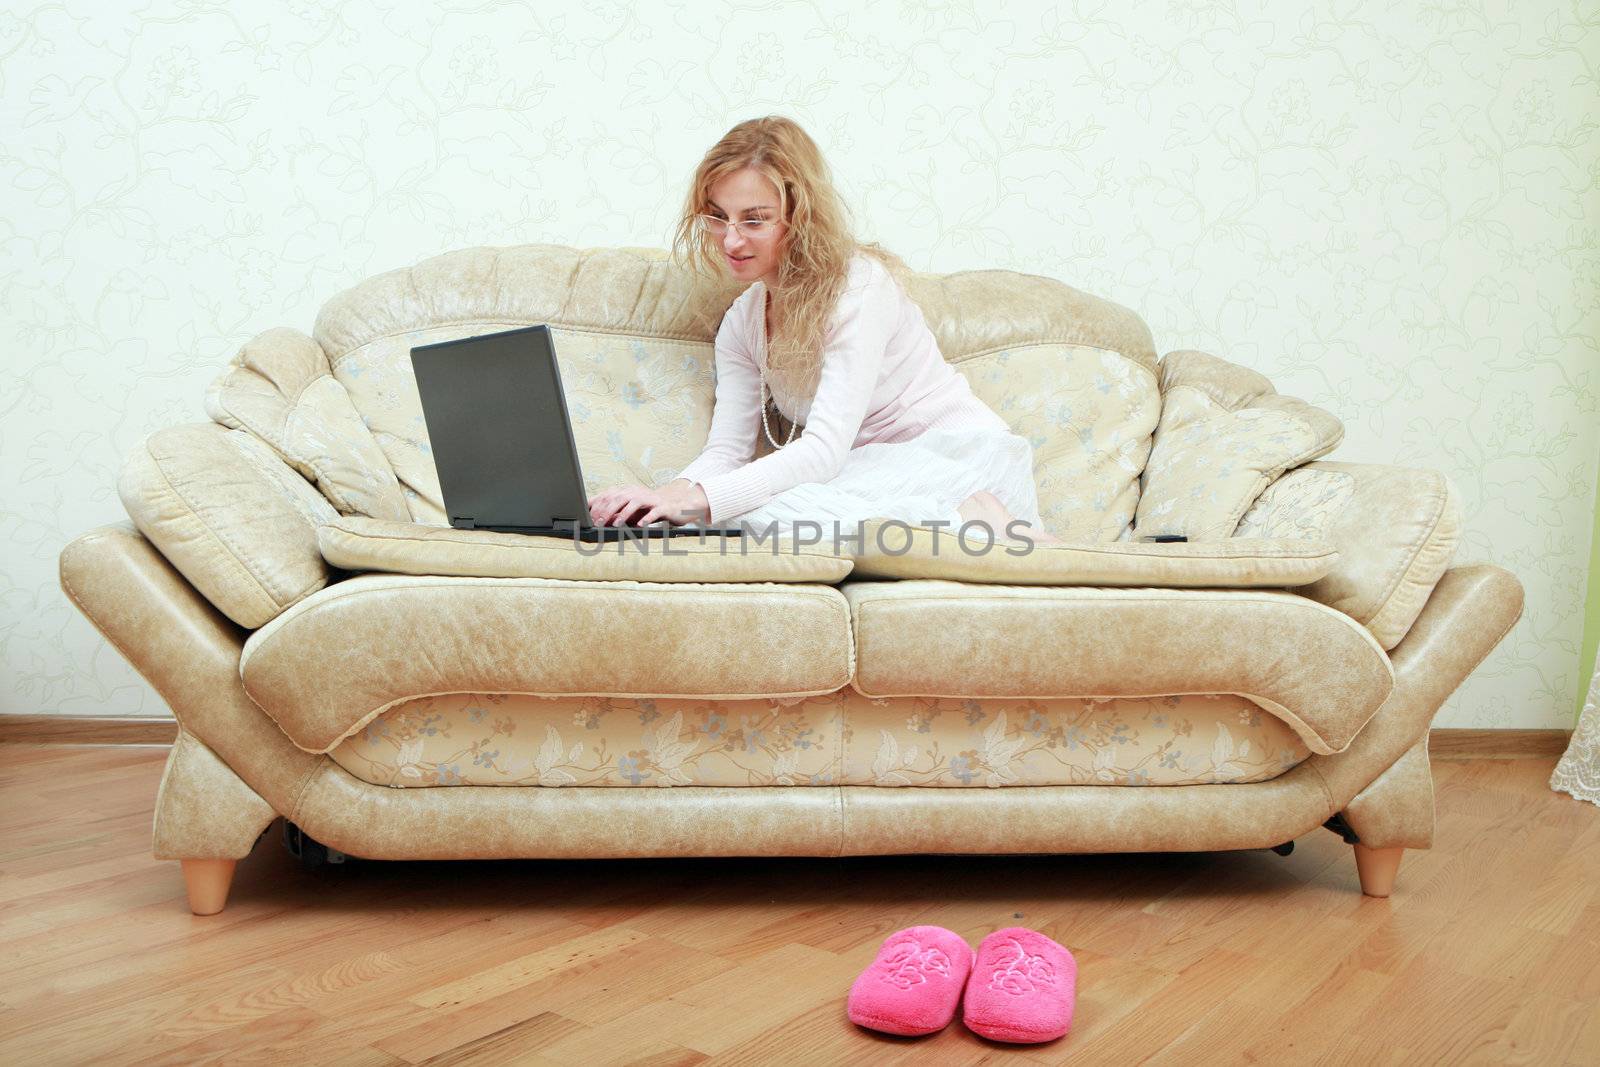 An image of a girl with a laptop on a sofa